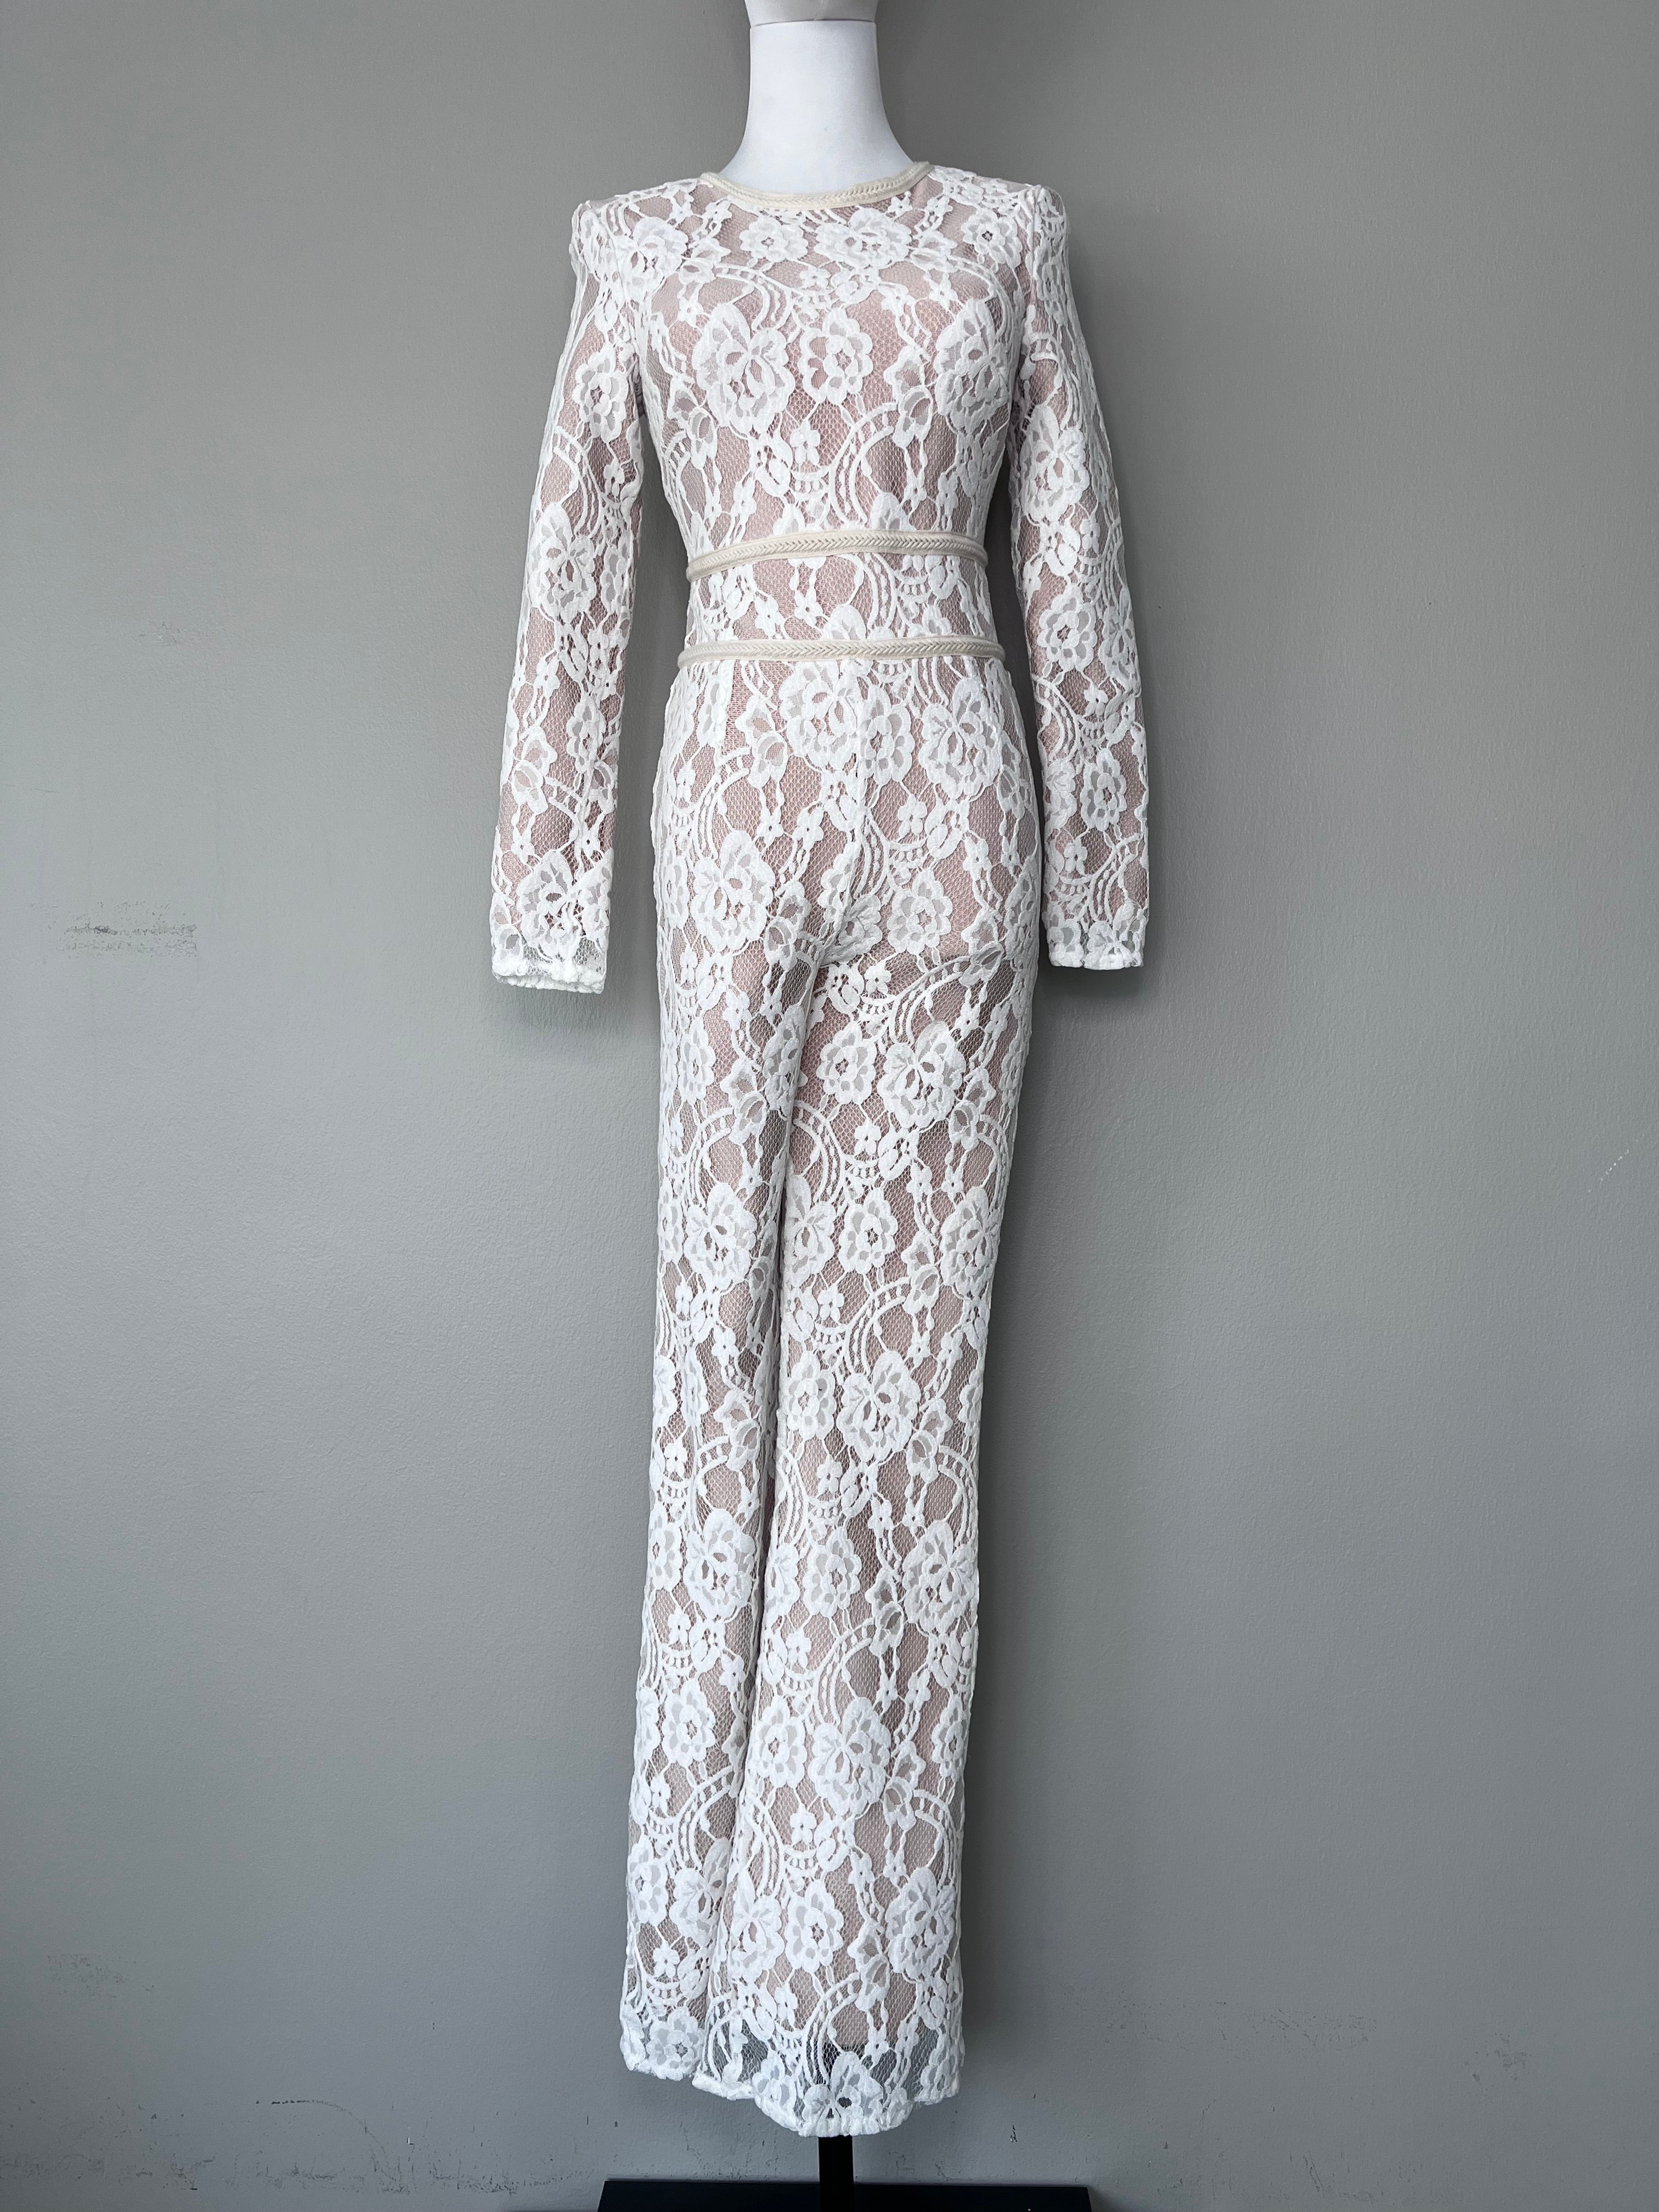 Nude jumpsuit with white lace patterns - 